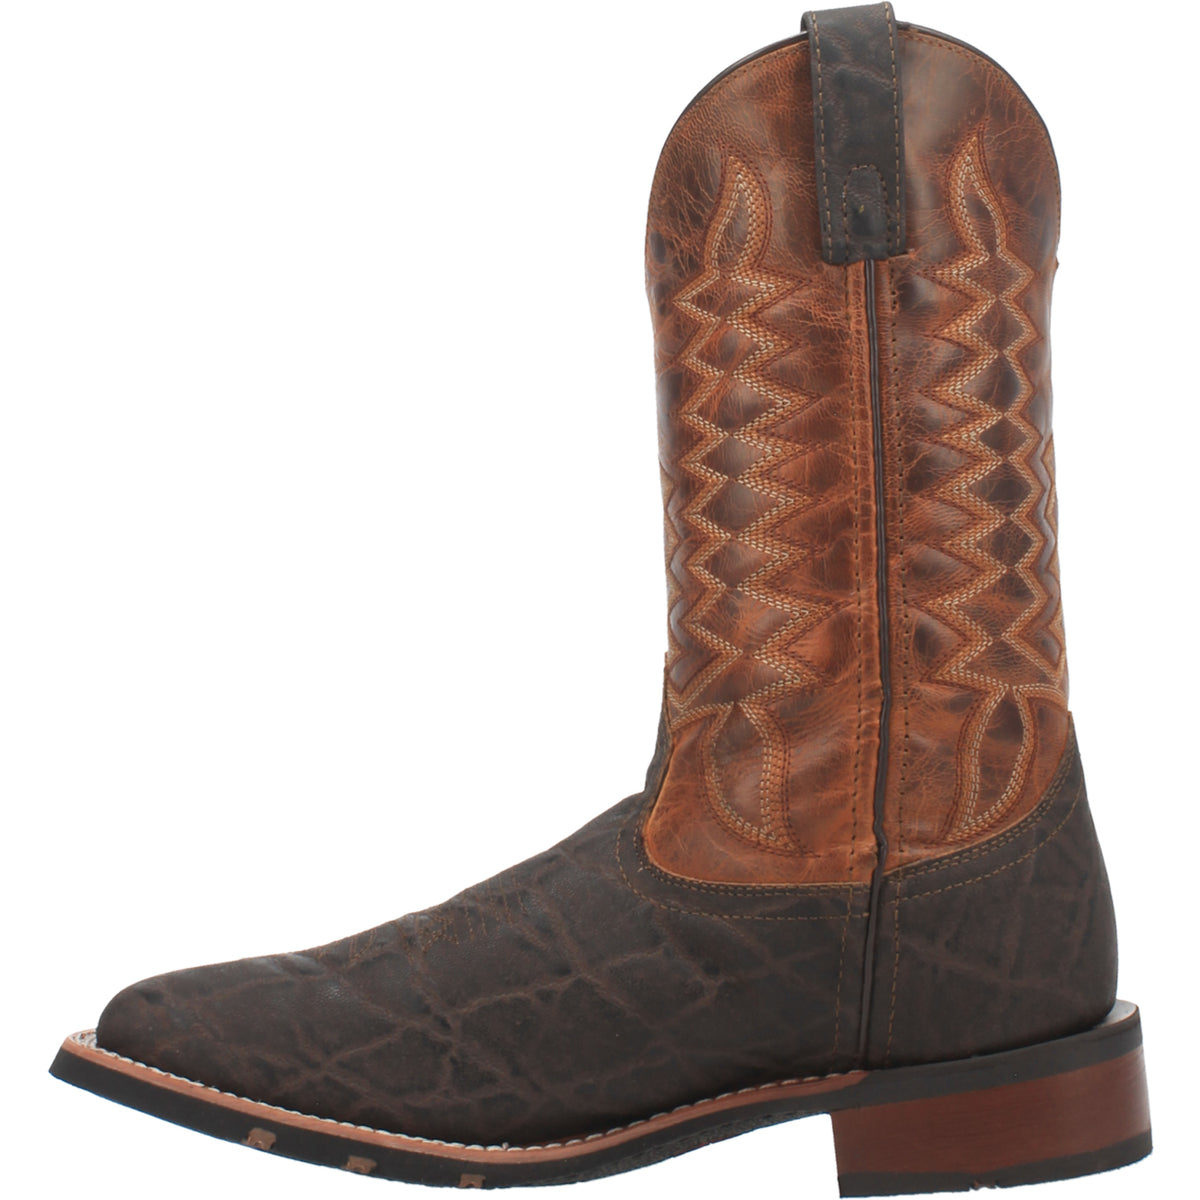 DILLON LEATHER BOOT Cover